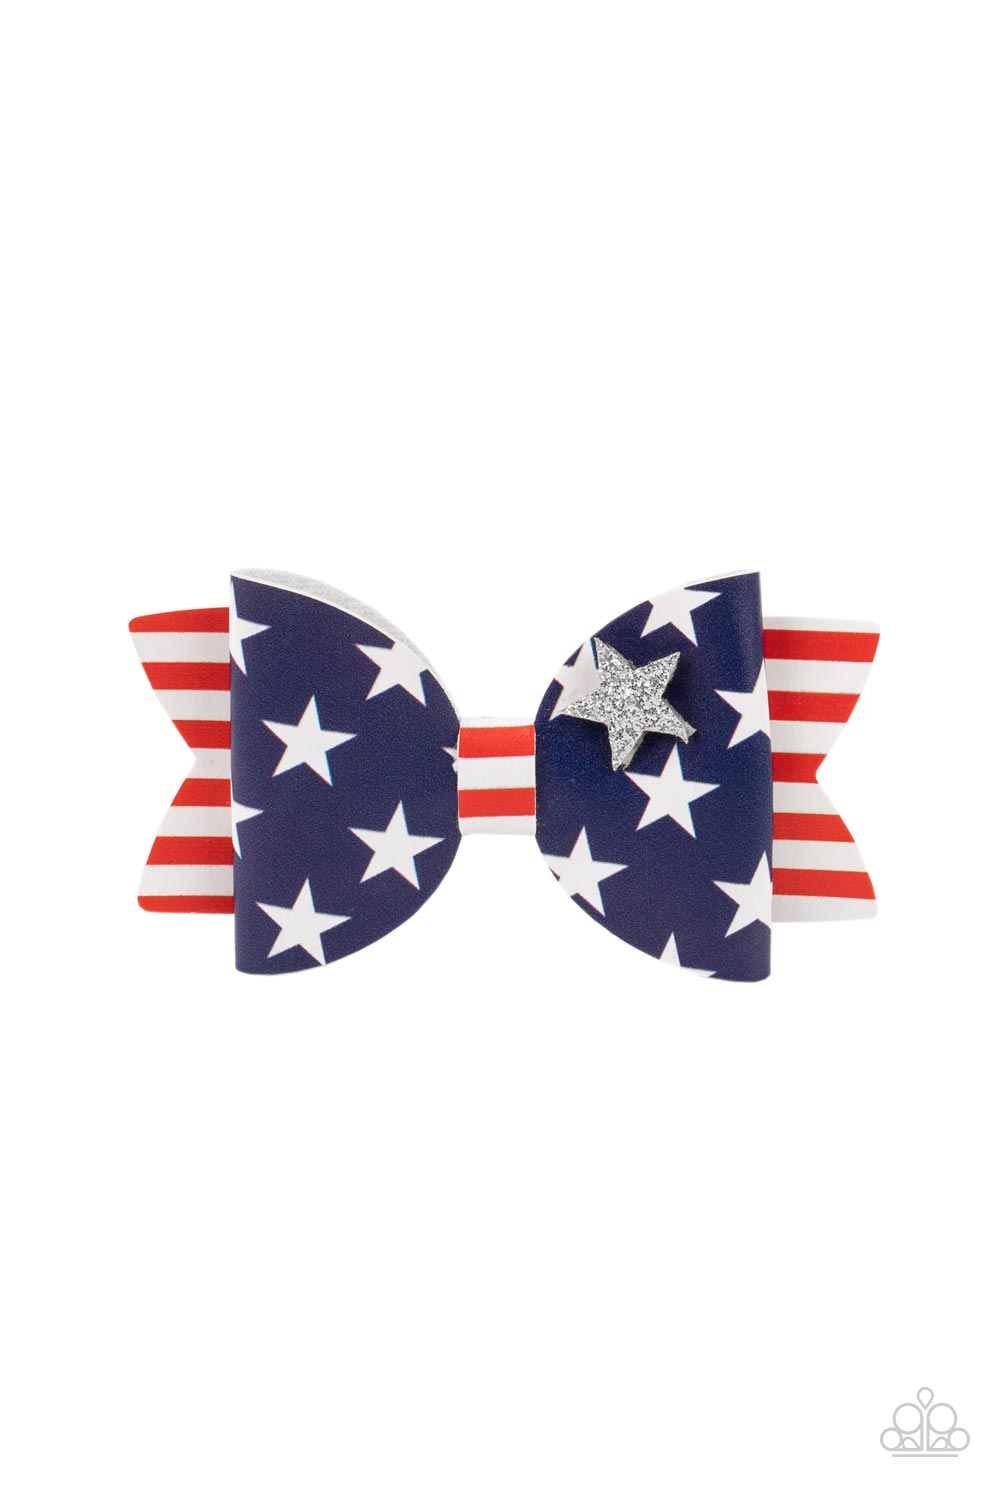 Paparazzi Accessories Red, White, and Bows - Multi A glittery silver star dots the corner of a leathery bow adorned in red and white stripes and white stars against a blue background, creating a patriotic centerpiece. Features a standard hair clip on the